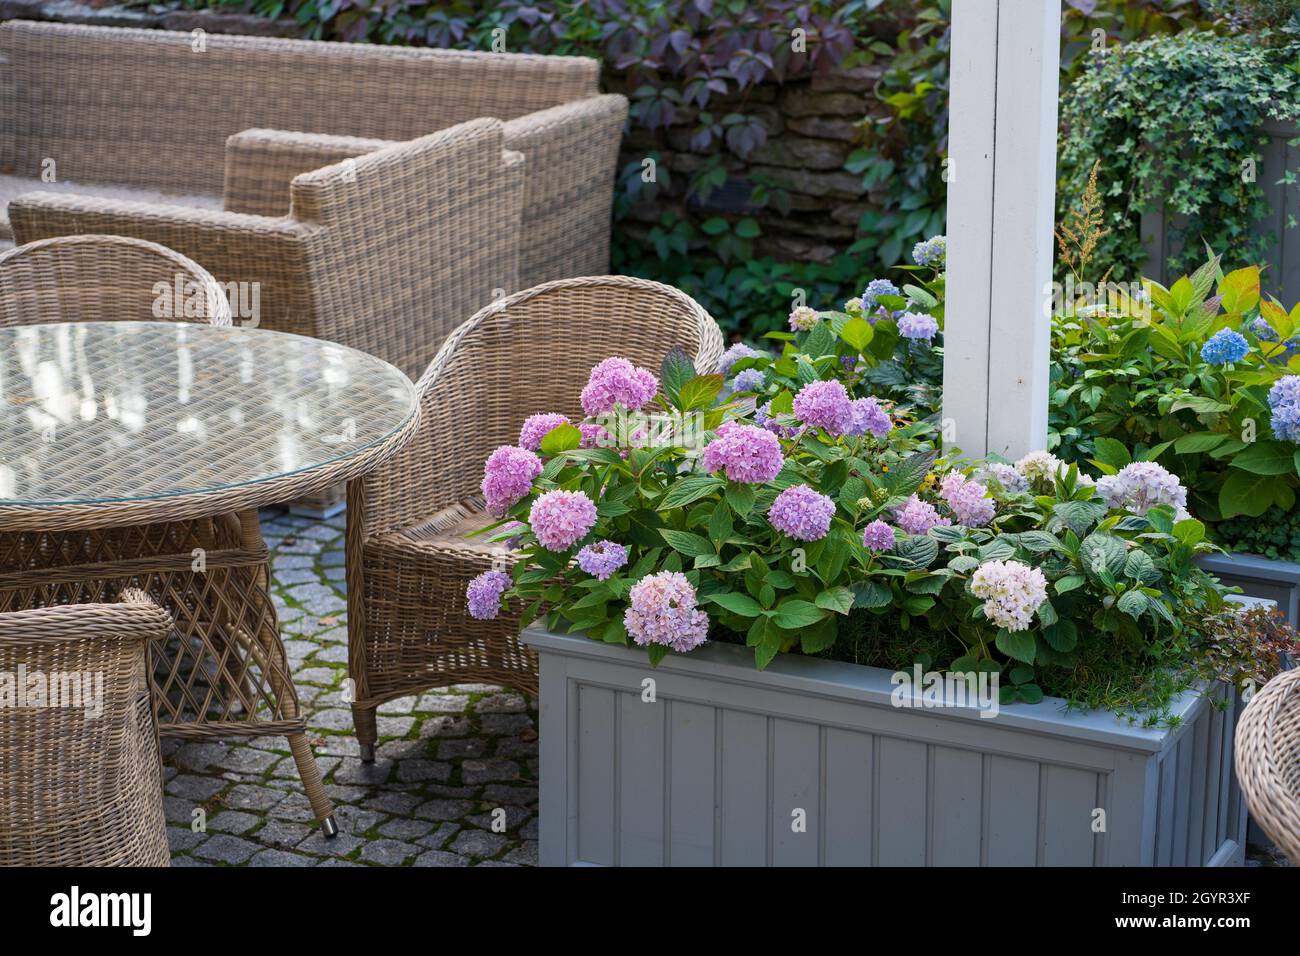 Spend evening on terrace: garden cafe or restaurant with wooden wicker chairs and blooming hydrangea Stock Photo